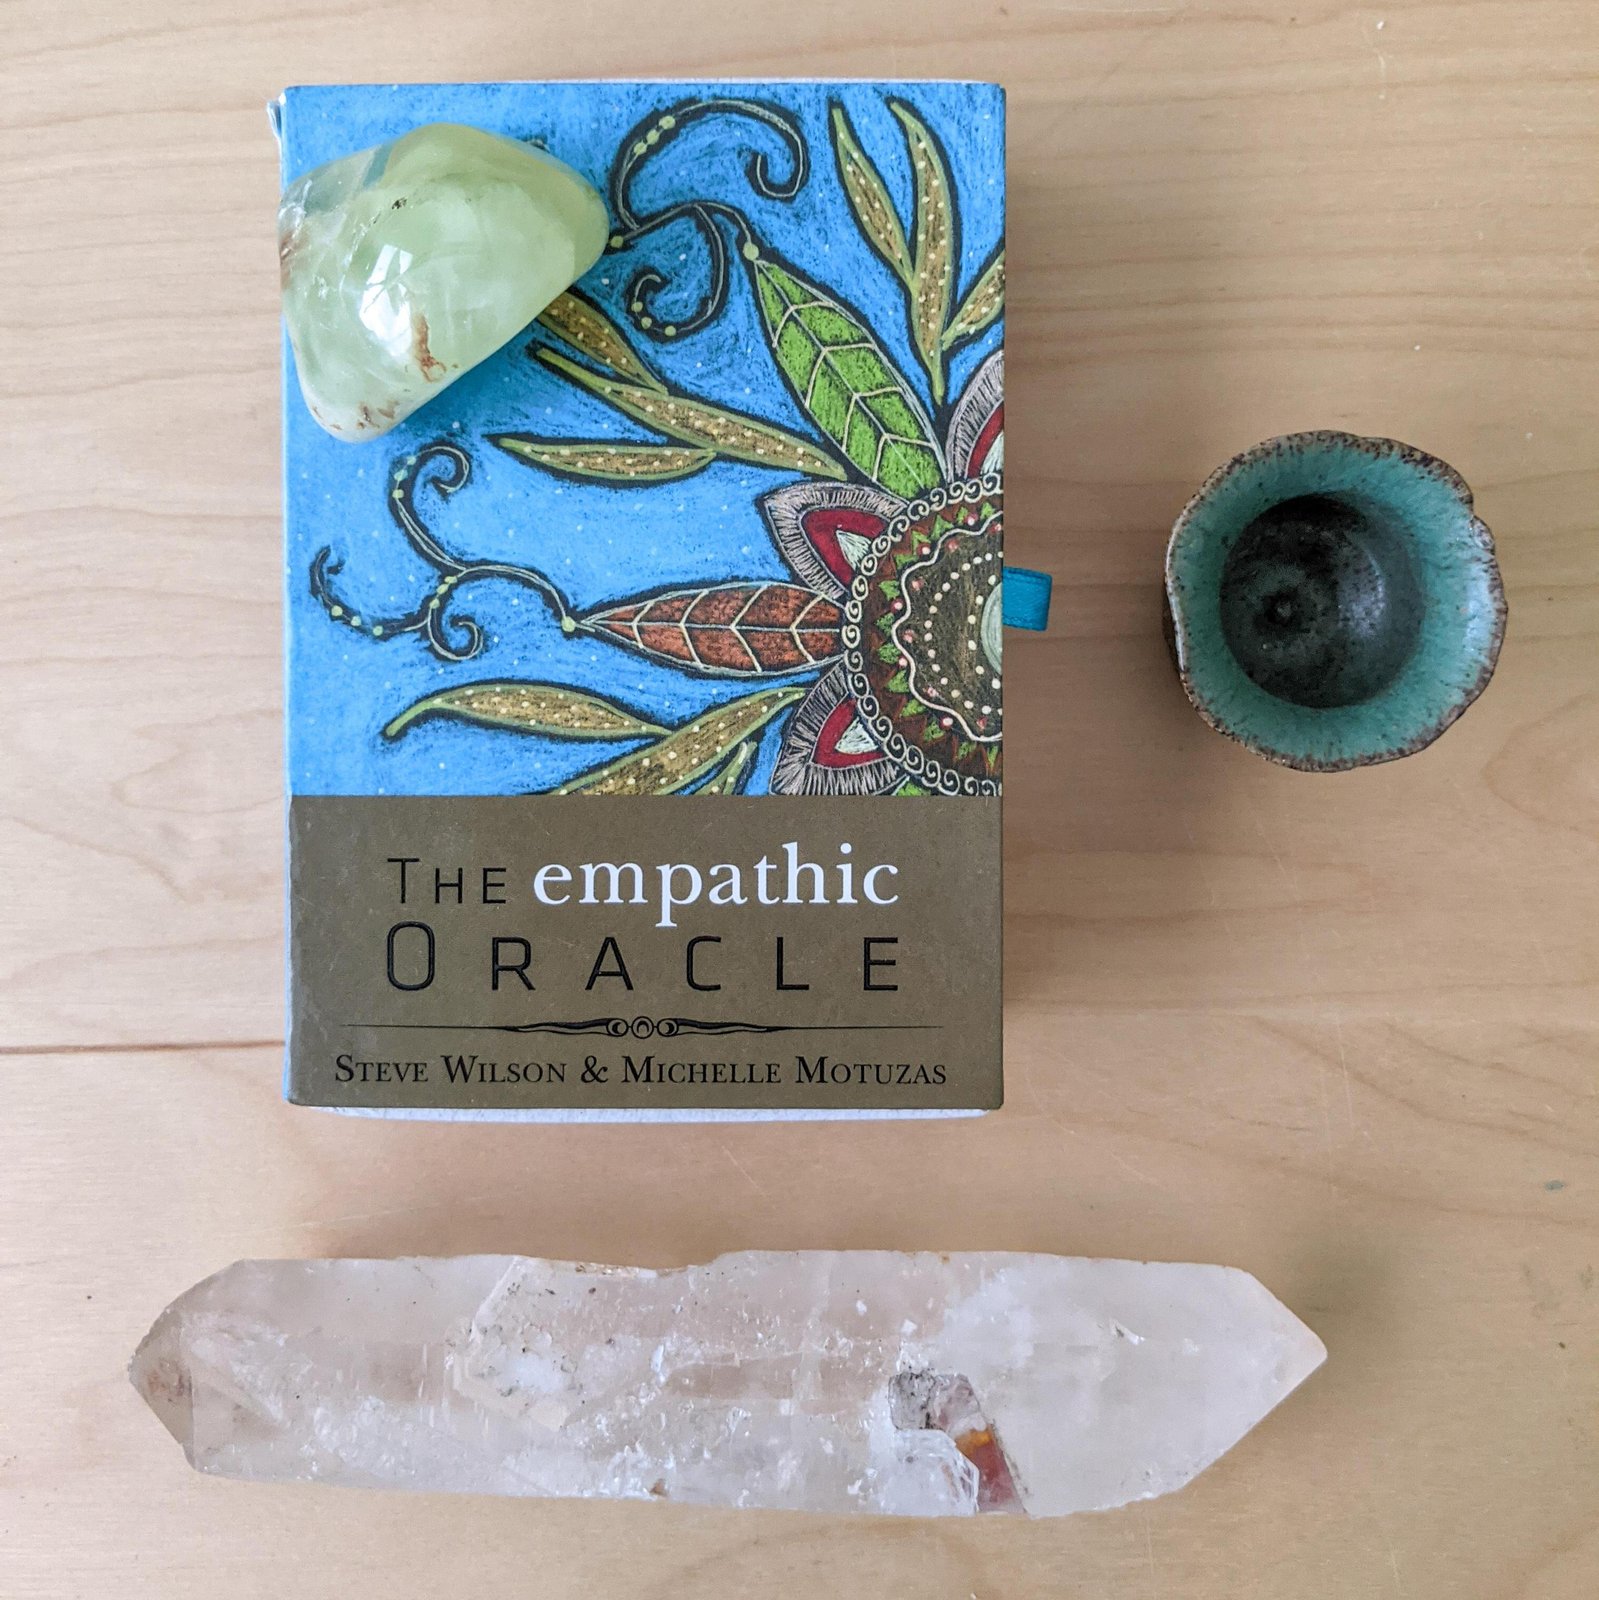 The Empathic oracle Deck by Michelle Motuzas published by Schiffer Books